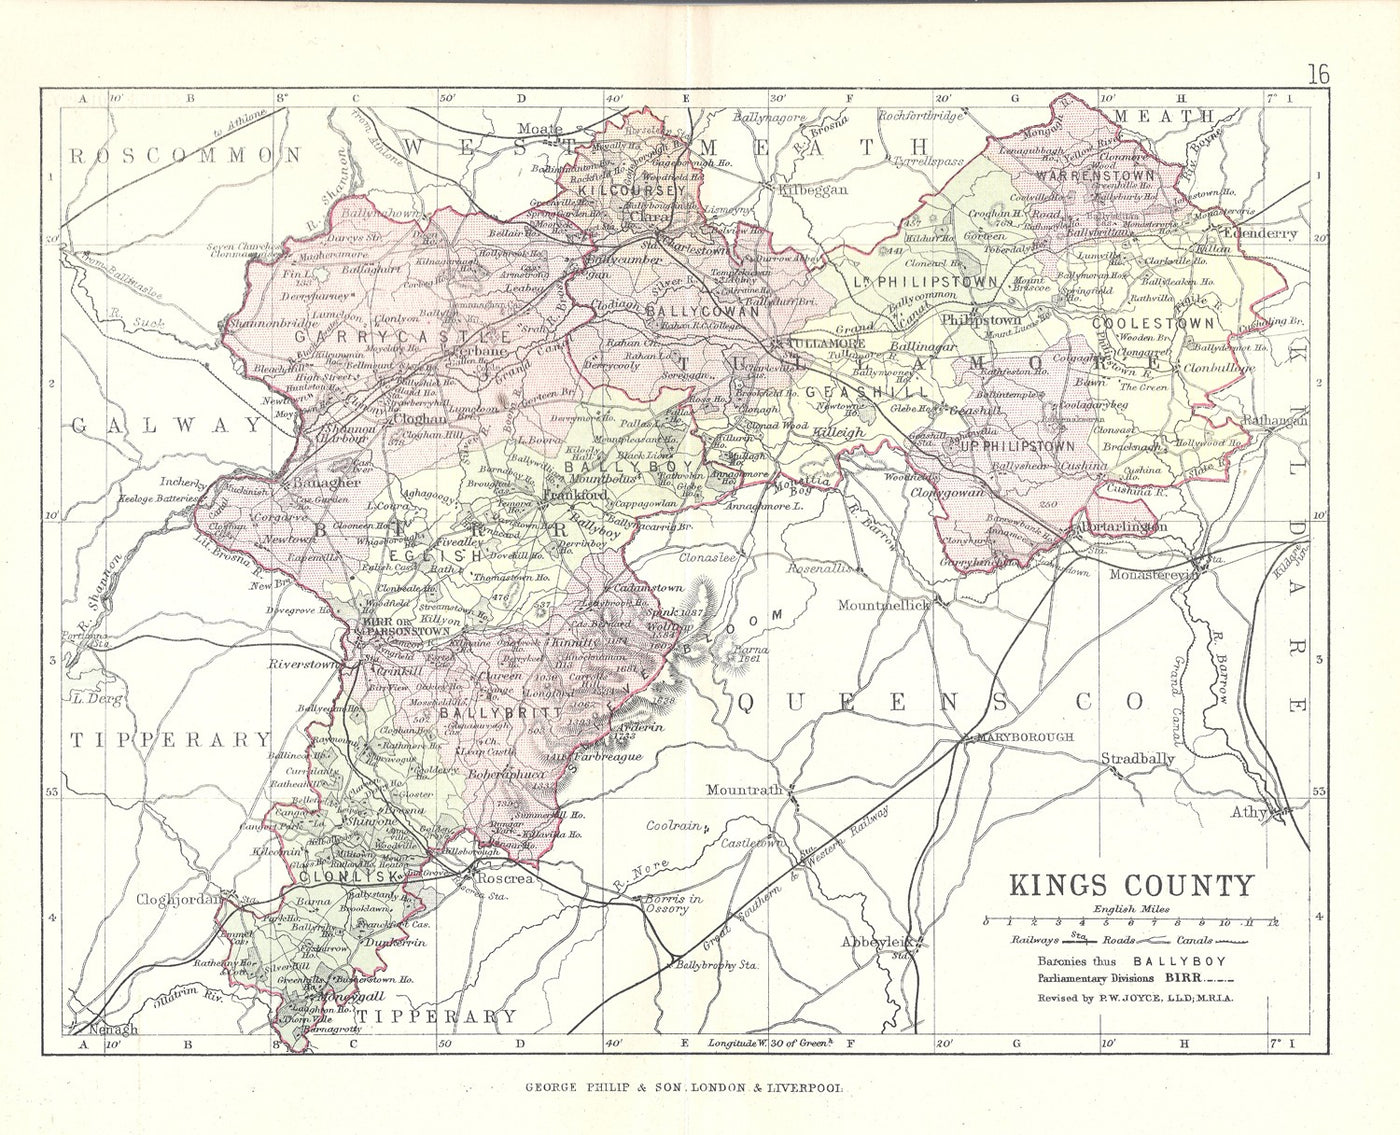 Kings County (Offaly) Ireland antique map 1890